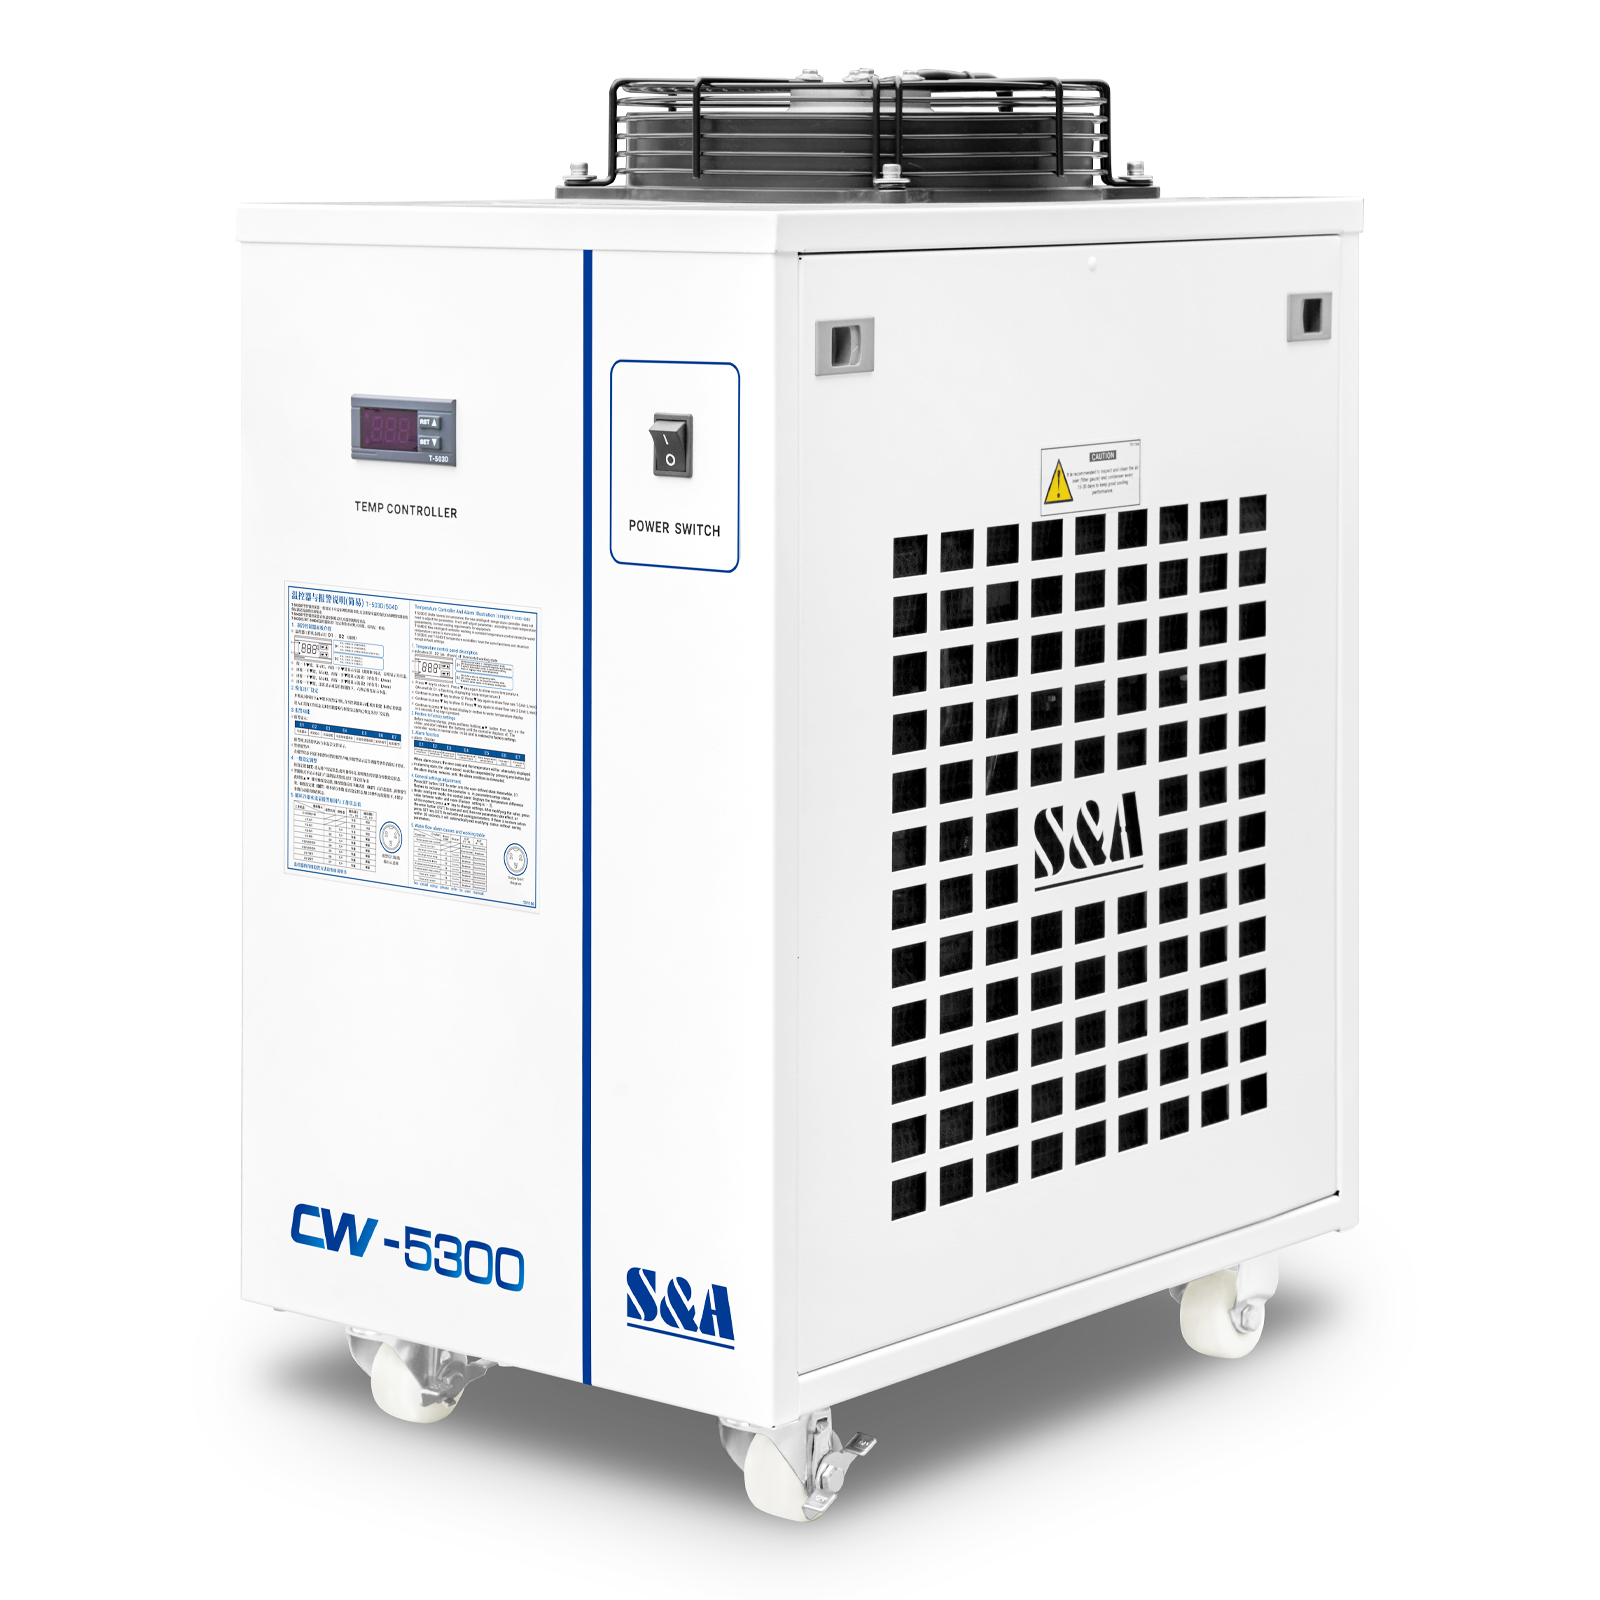 S&A CW-5300DI Industrial Water Chiller (AC 1P 110V 60HZ) for 1 x 200W CO2 laser, 100W Laser Diode, 75W Solid-state Laser, 18KW CNC Spindle